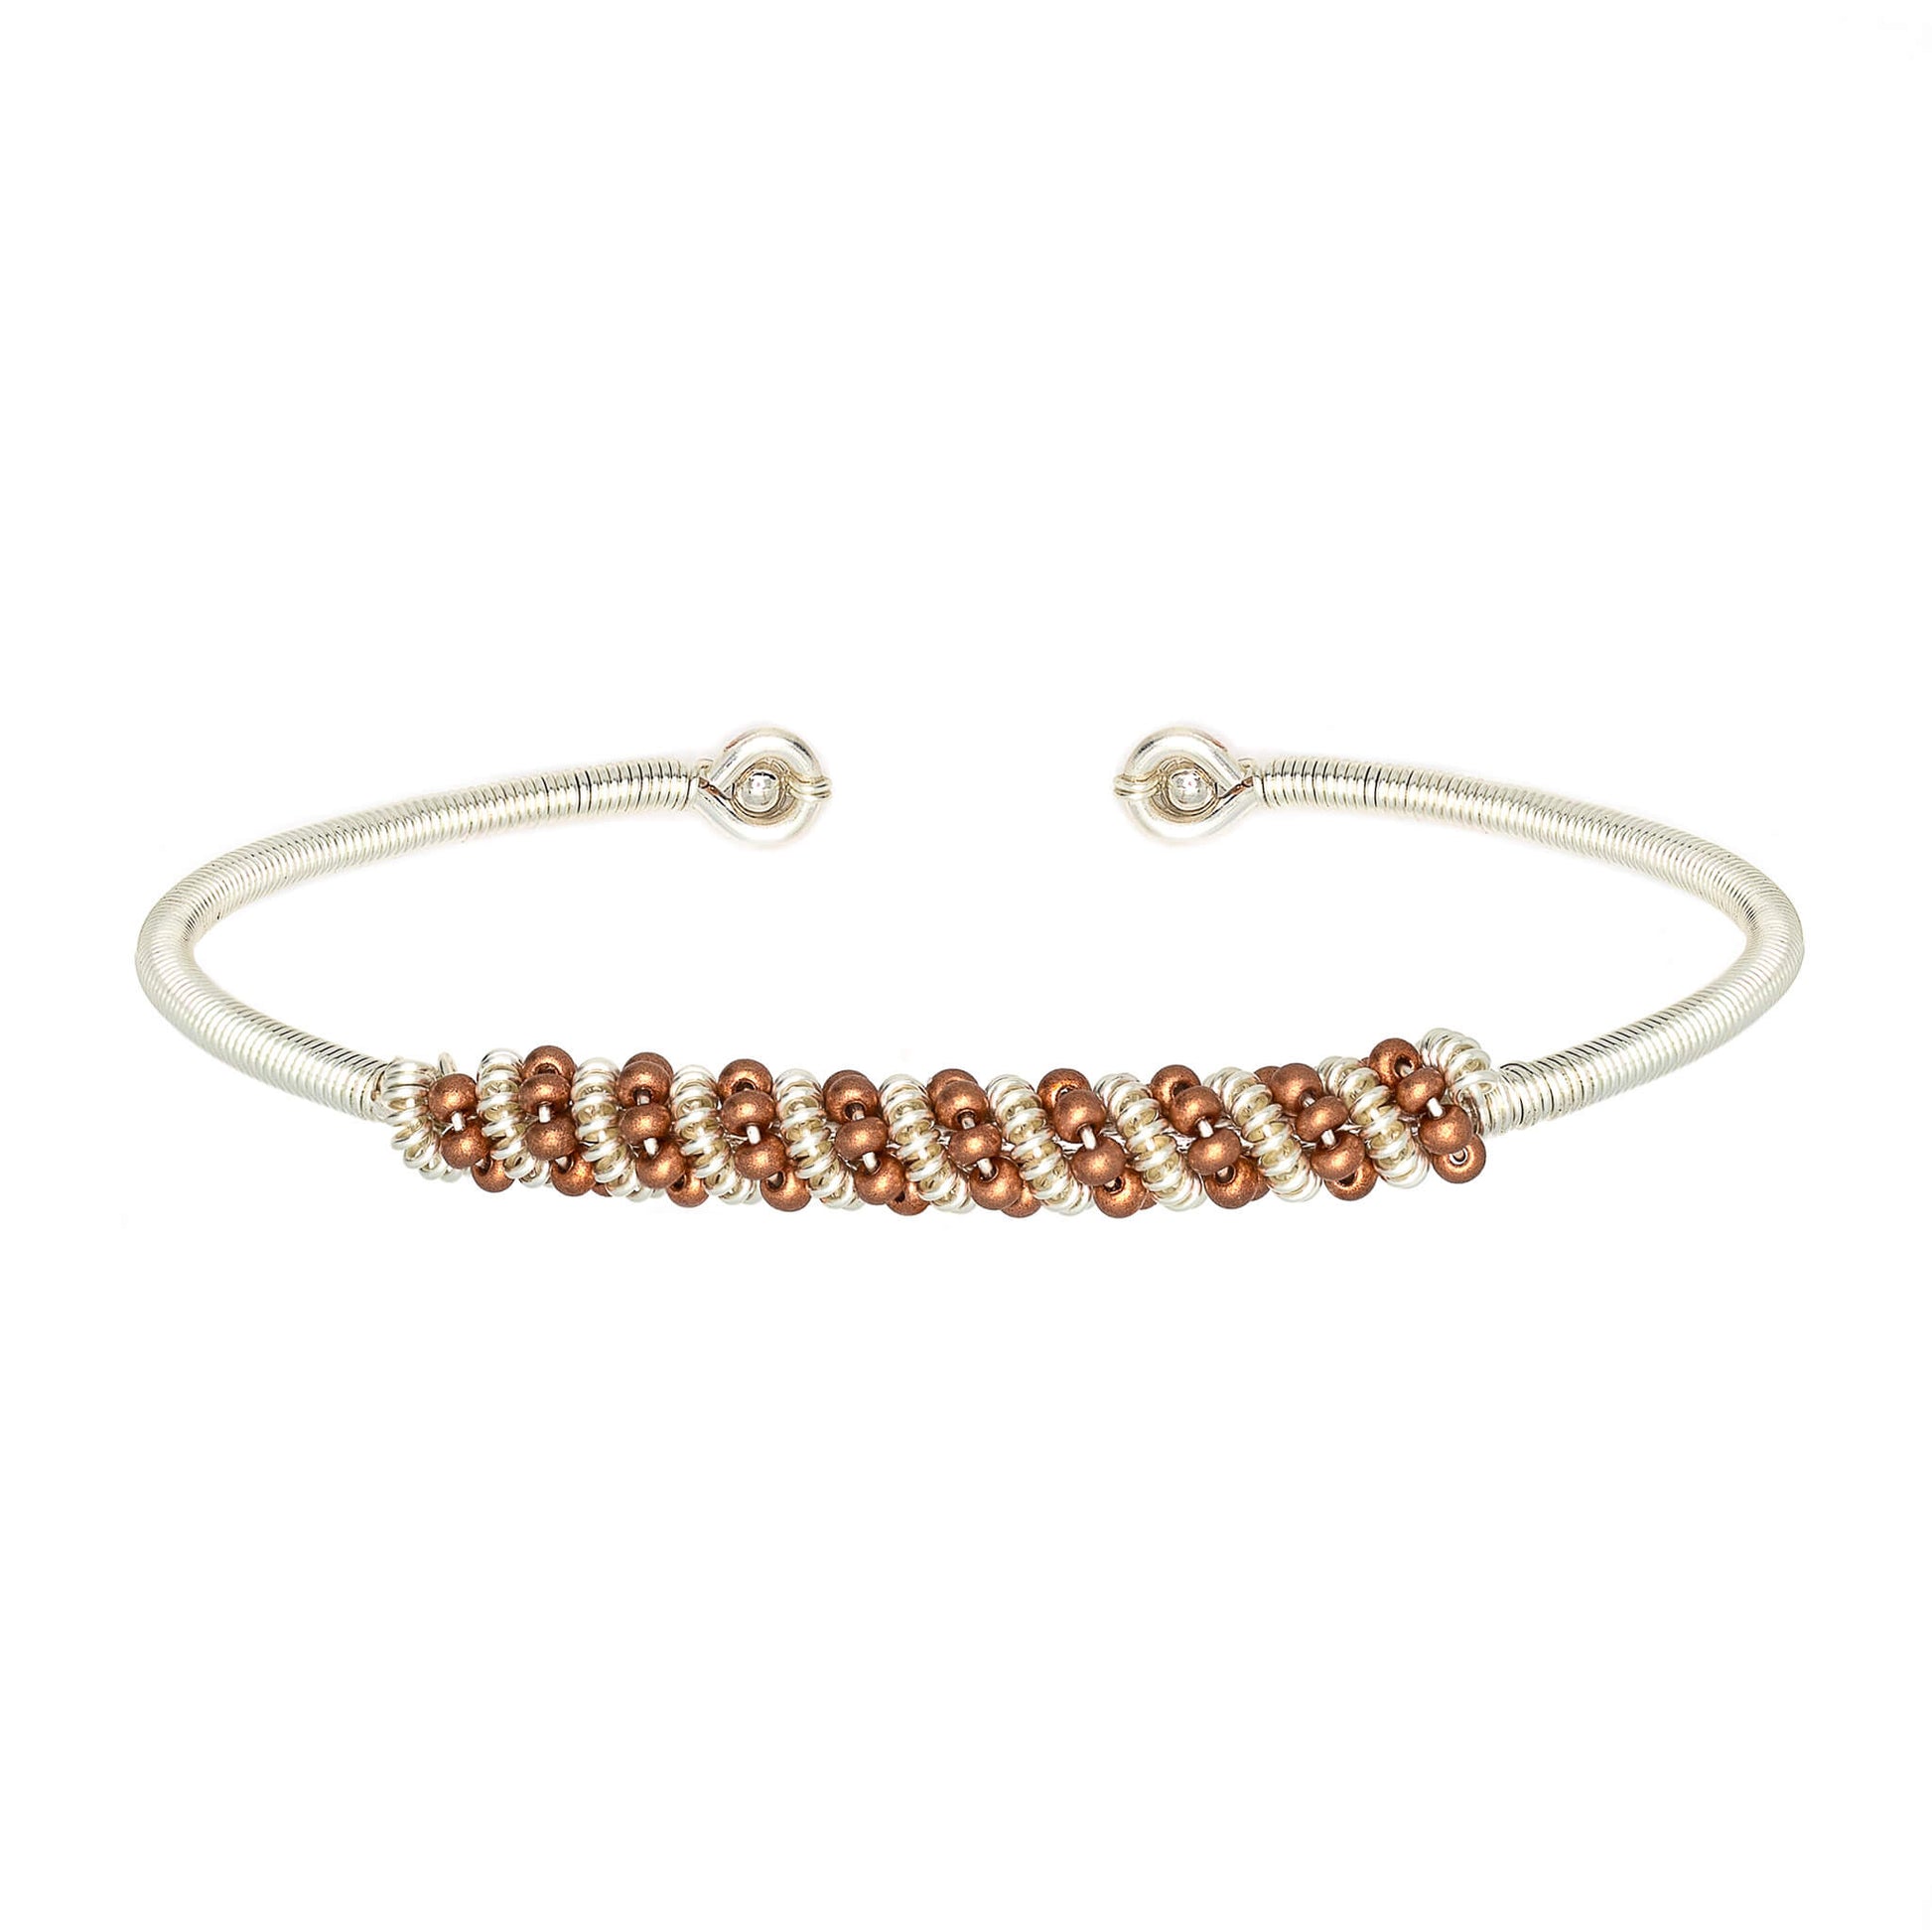 Siegen Bracelet is one size fits all. Silver and brown bracelet. Handmade with Non-tarnish silver wire and Czech seed beads crystals. Wire-wrapped beaded bracelet.